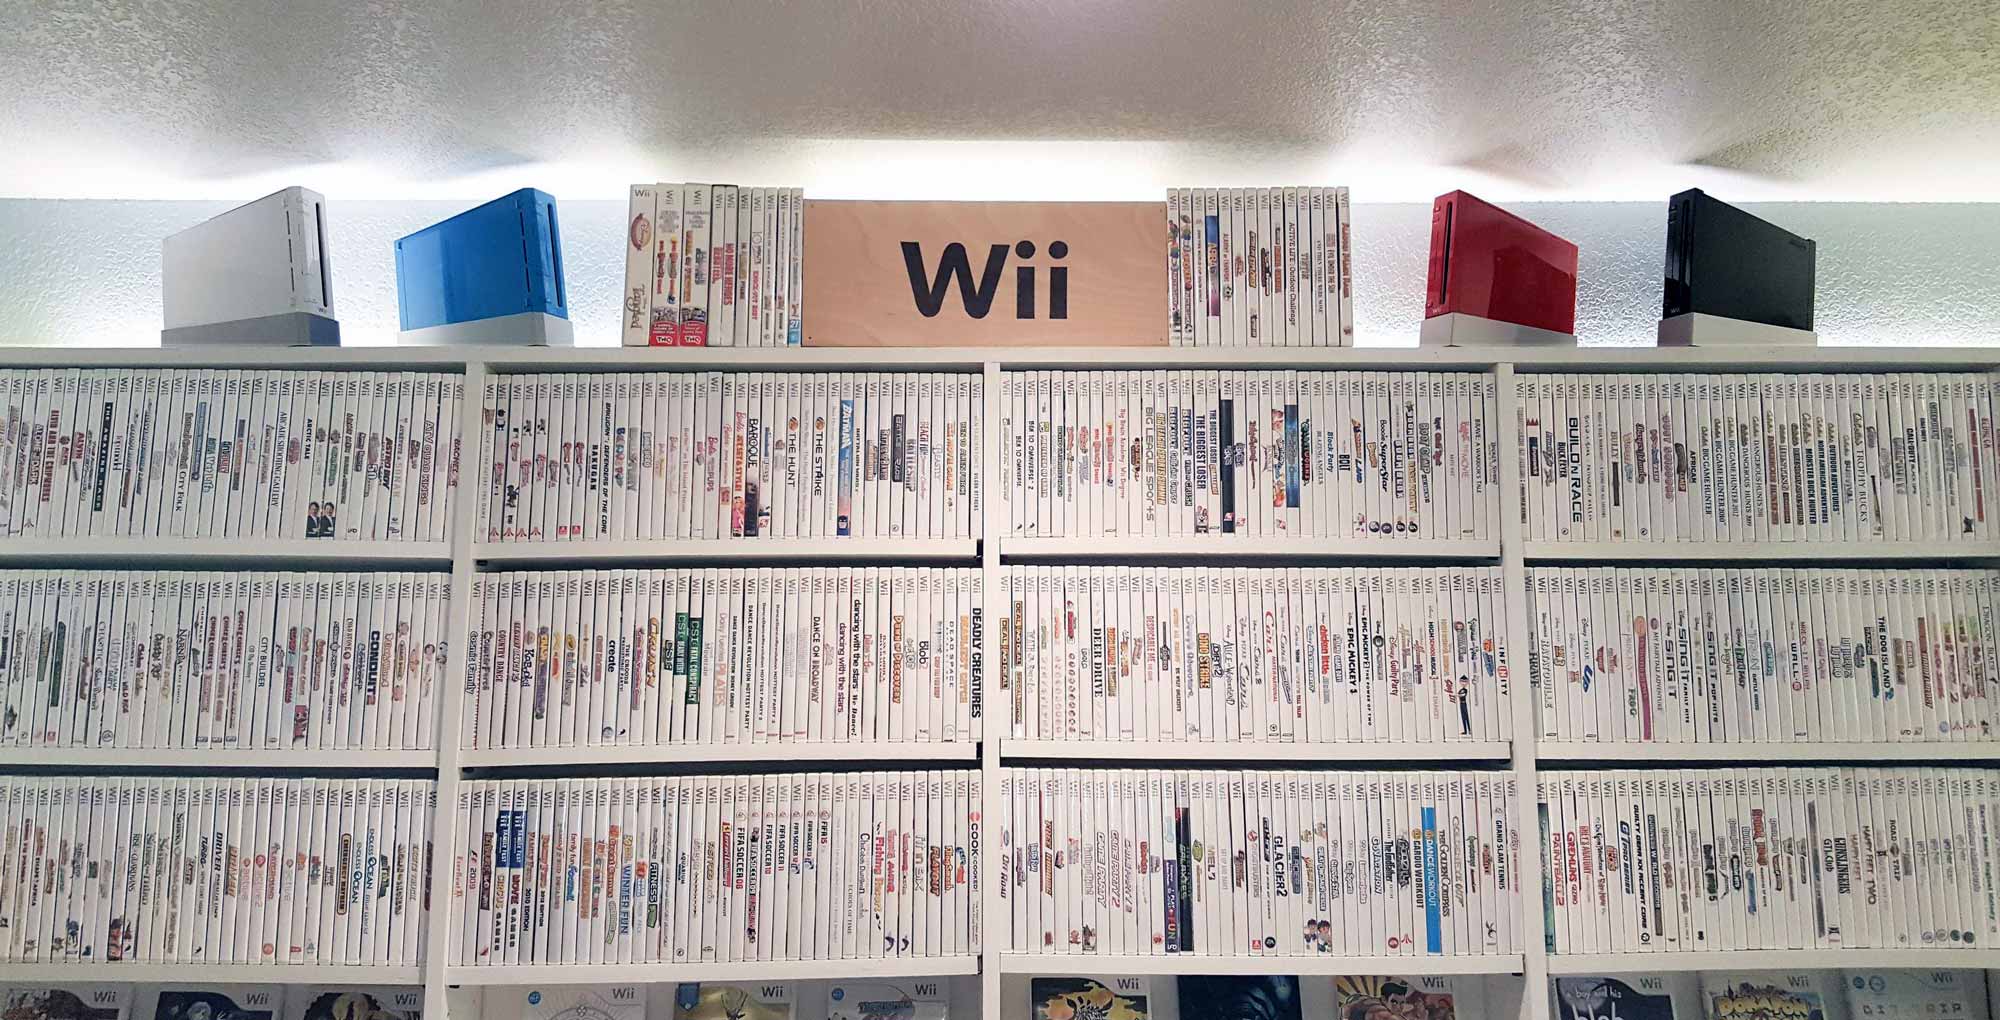 Wii game collection - Canadian mobile stories